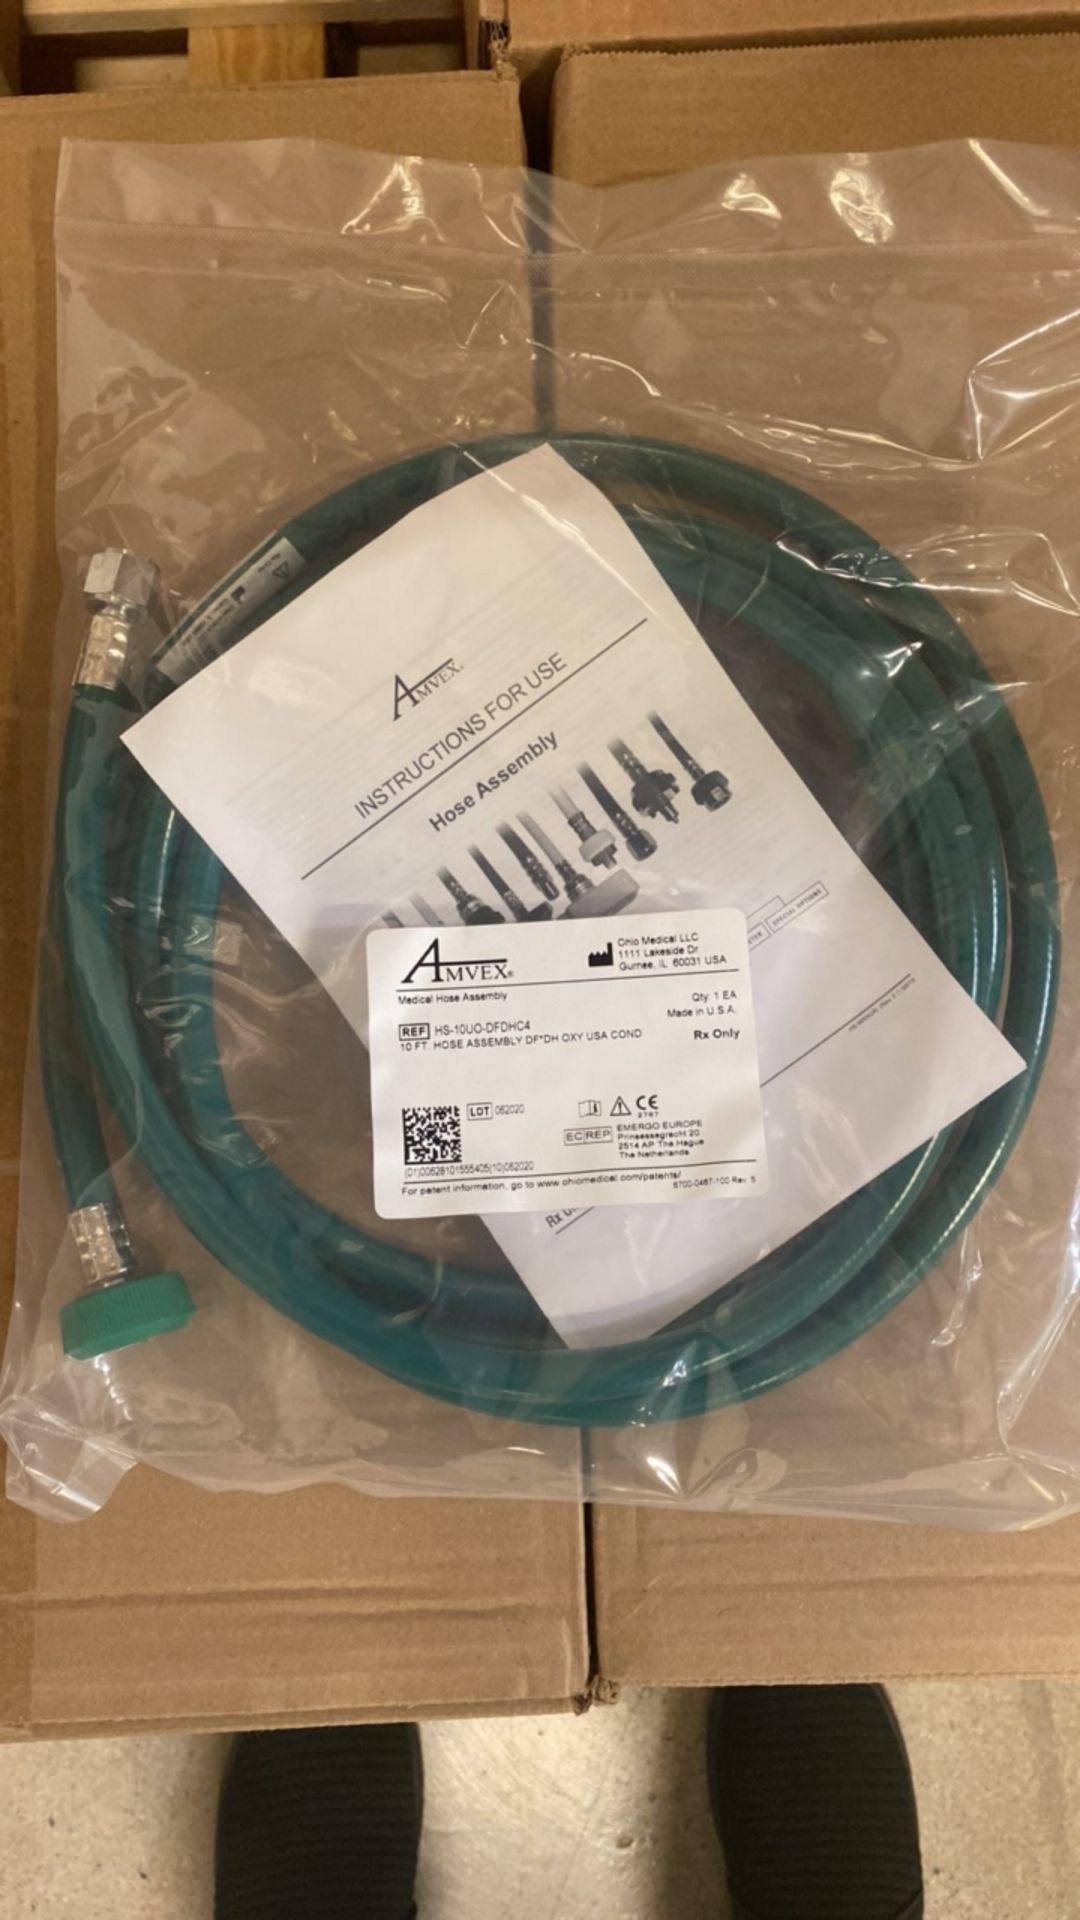 OHIO MEDICAL HS-10UO-DFDHC4 PALLET OF 10 FT. OXYGEN HOSE ASSEMBLY QTY: 20 CASES/20 HOSES PER CASE